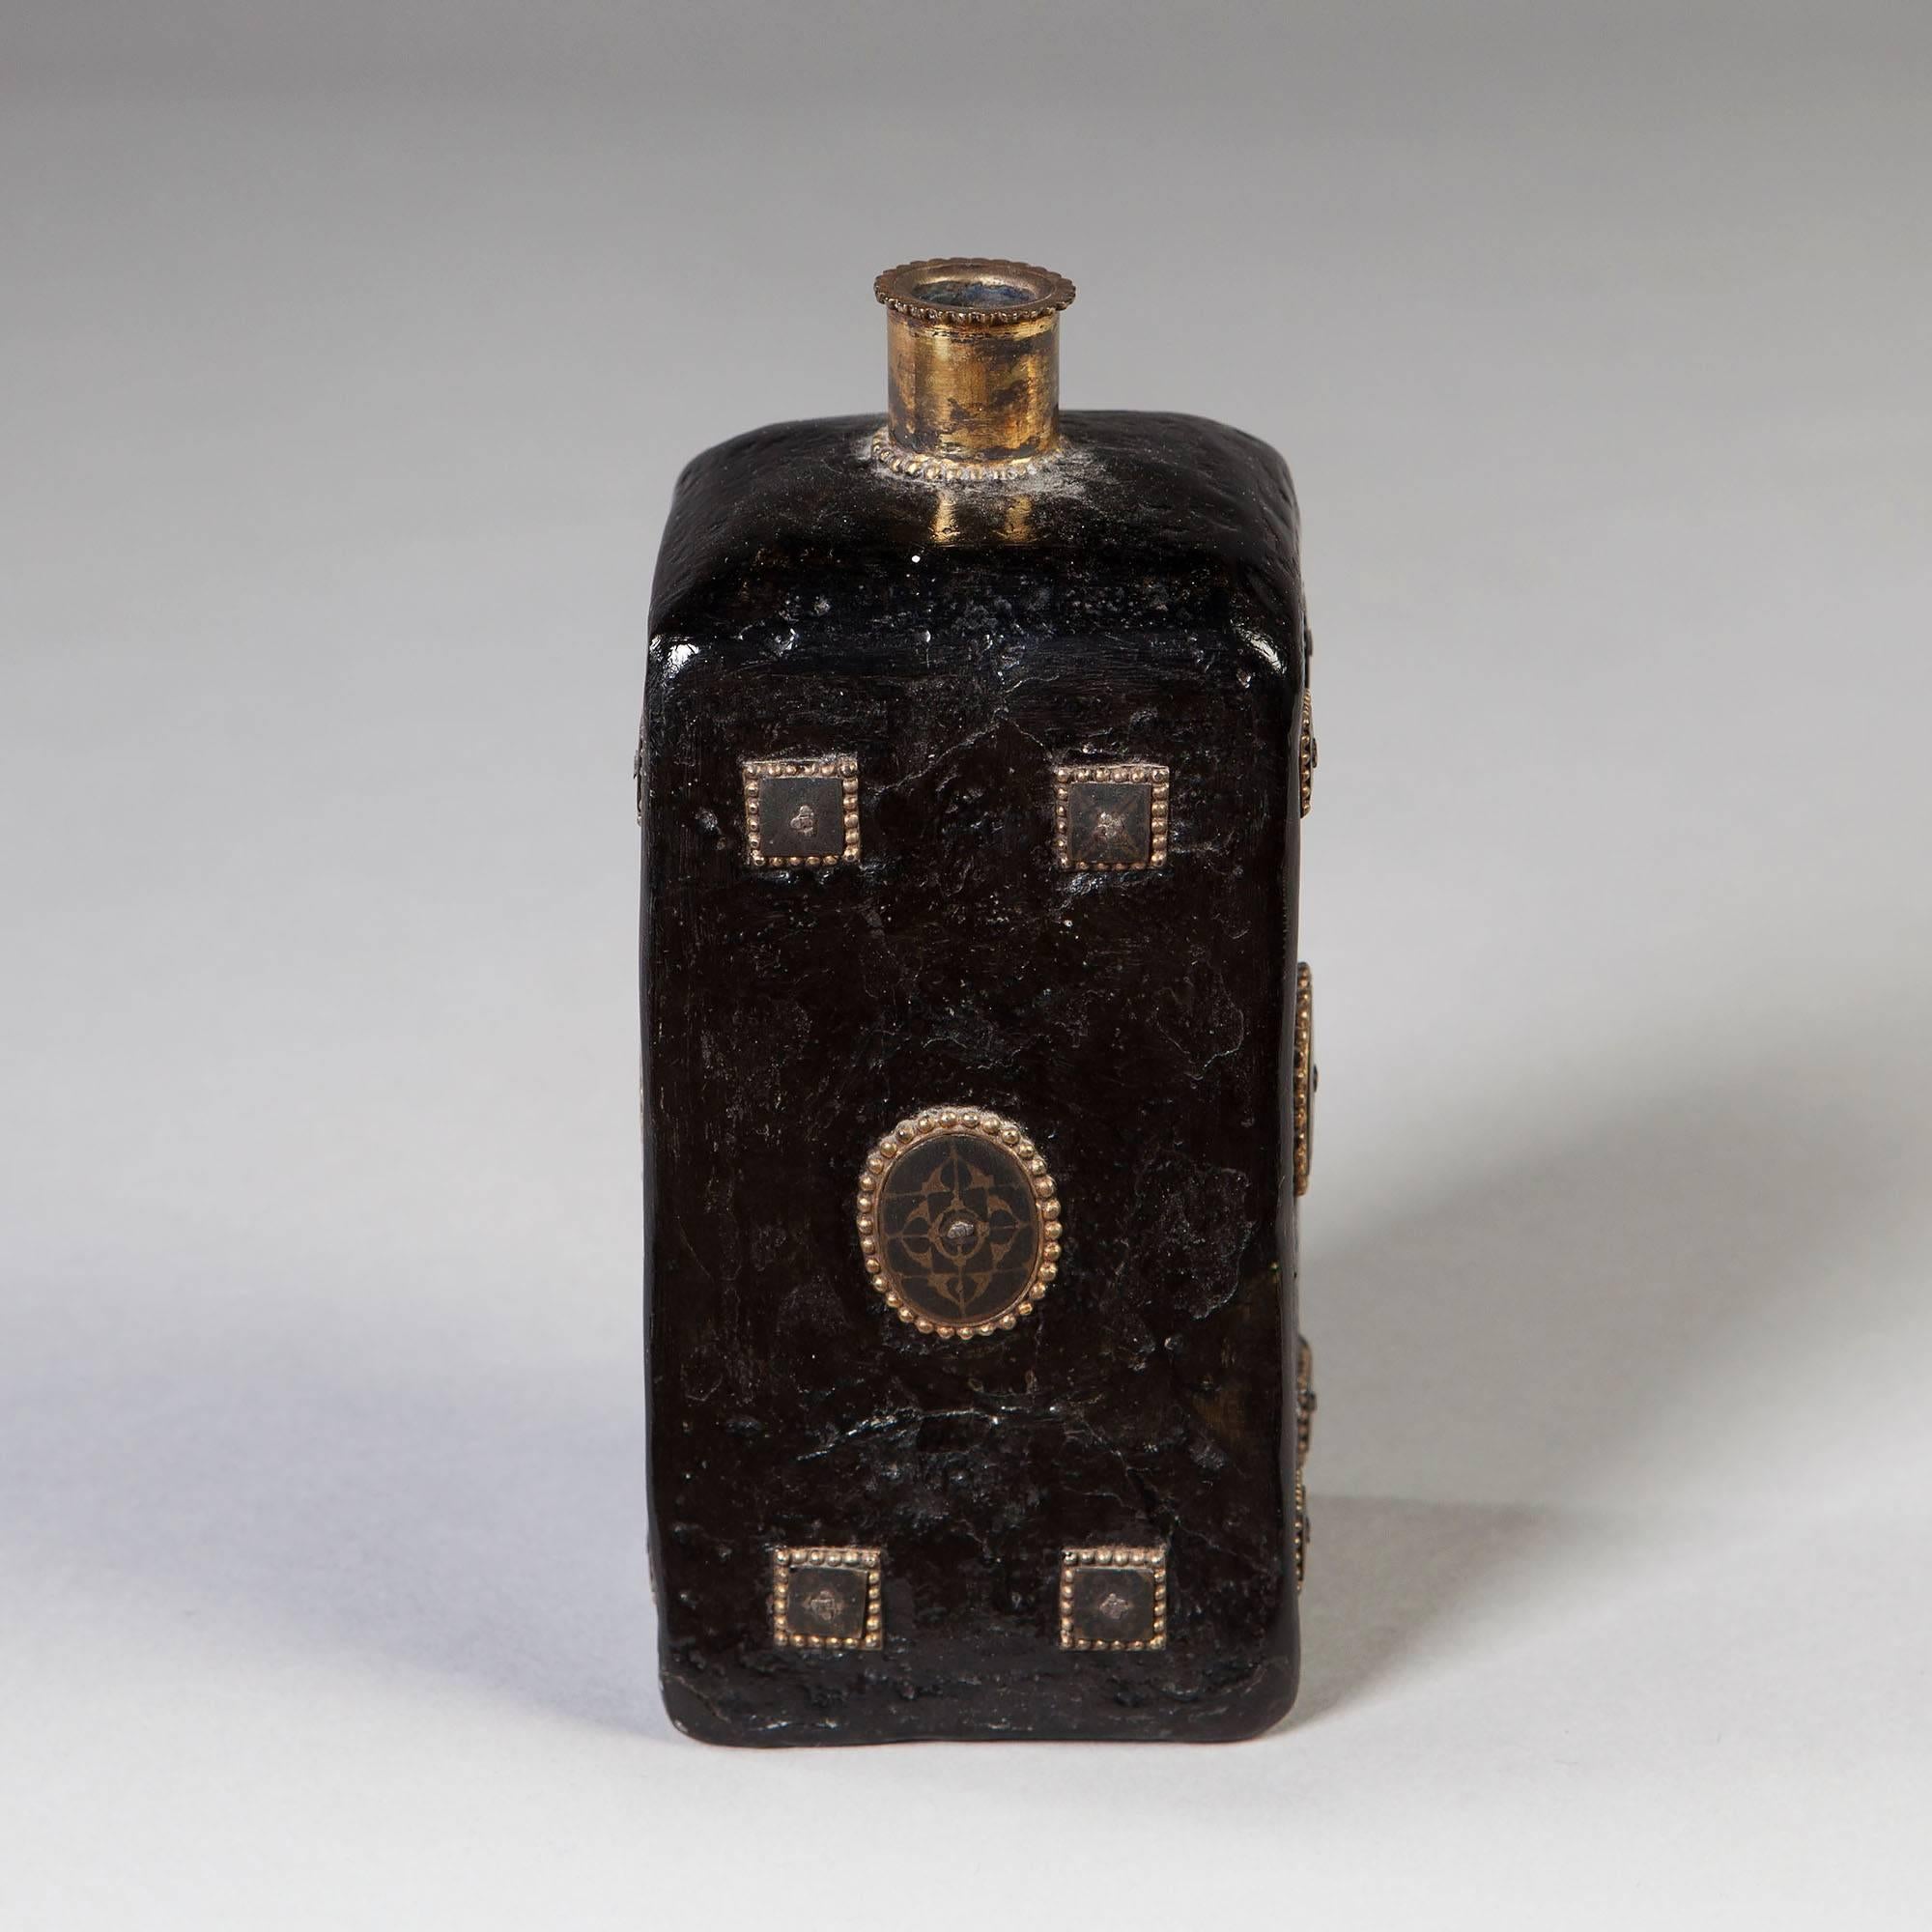 Spain, early 17th century.

A rare early 17th century Niello flask covered with black pitch and mounted with silver gilt mounts and set with niello ovals and squares. 
Measures: Height 6ins 15cm,
width 2ins,
depth 2ins.

Shipping insurance is